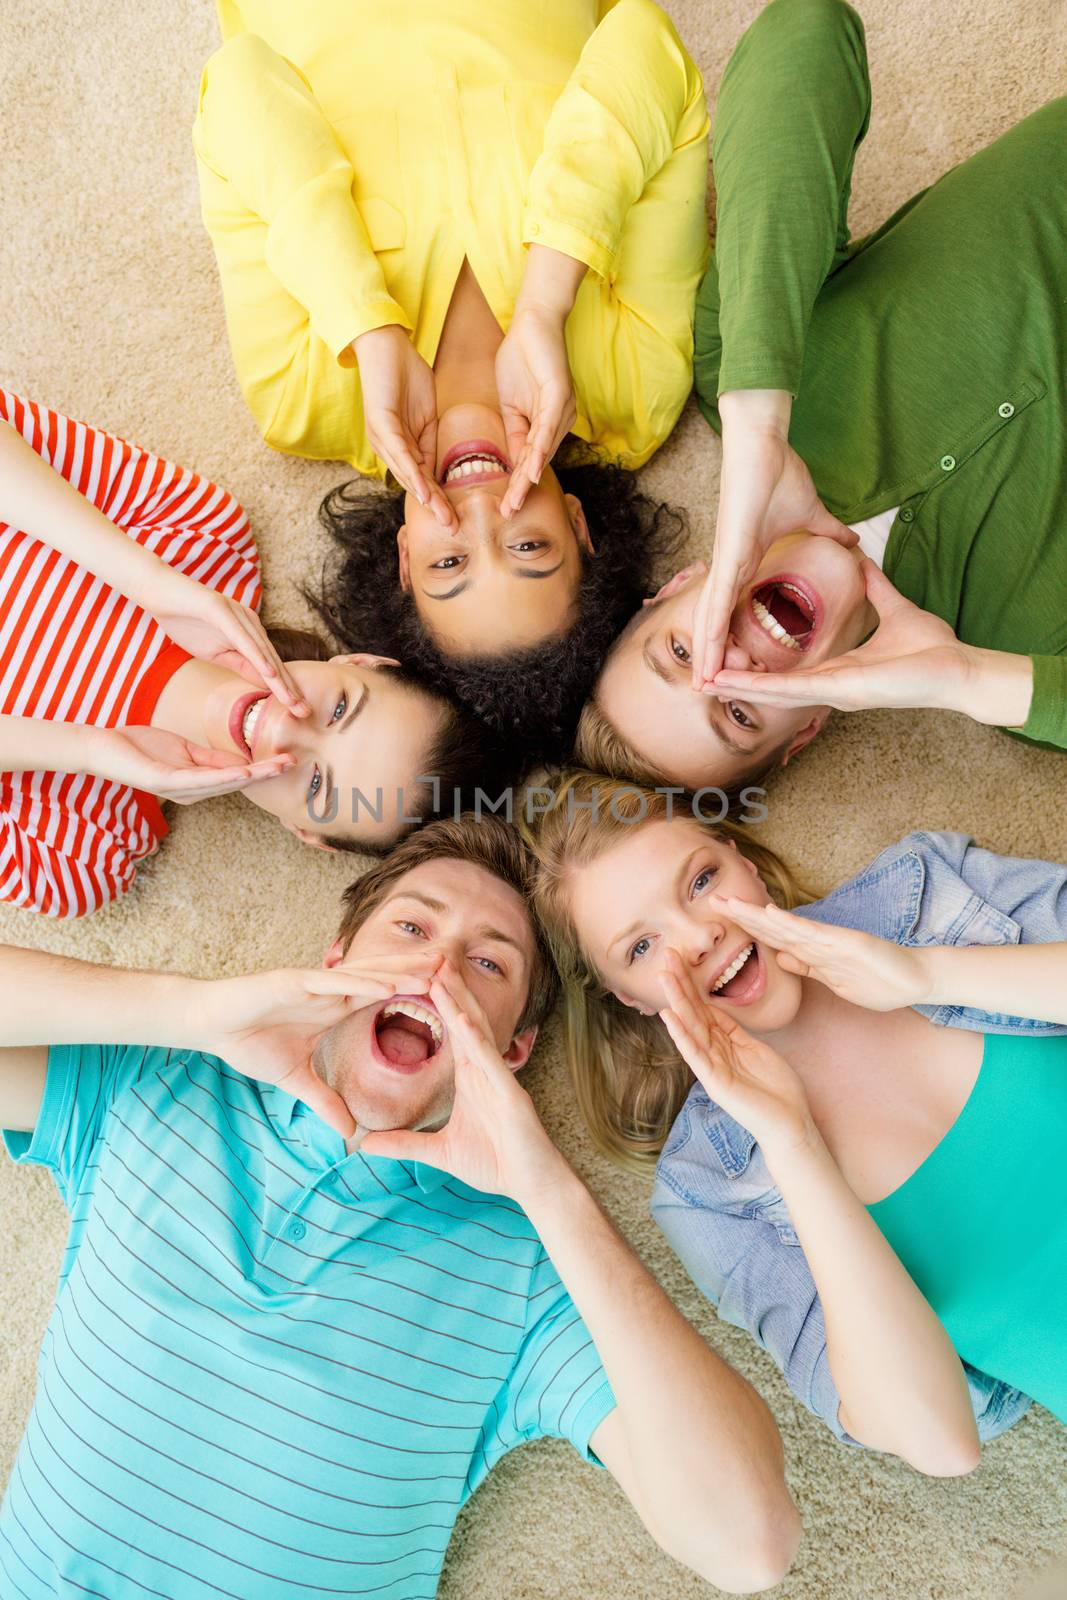 education and happiness concept - group of young smiling people lying down on floor in circle screaming and shouting